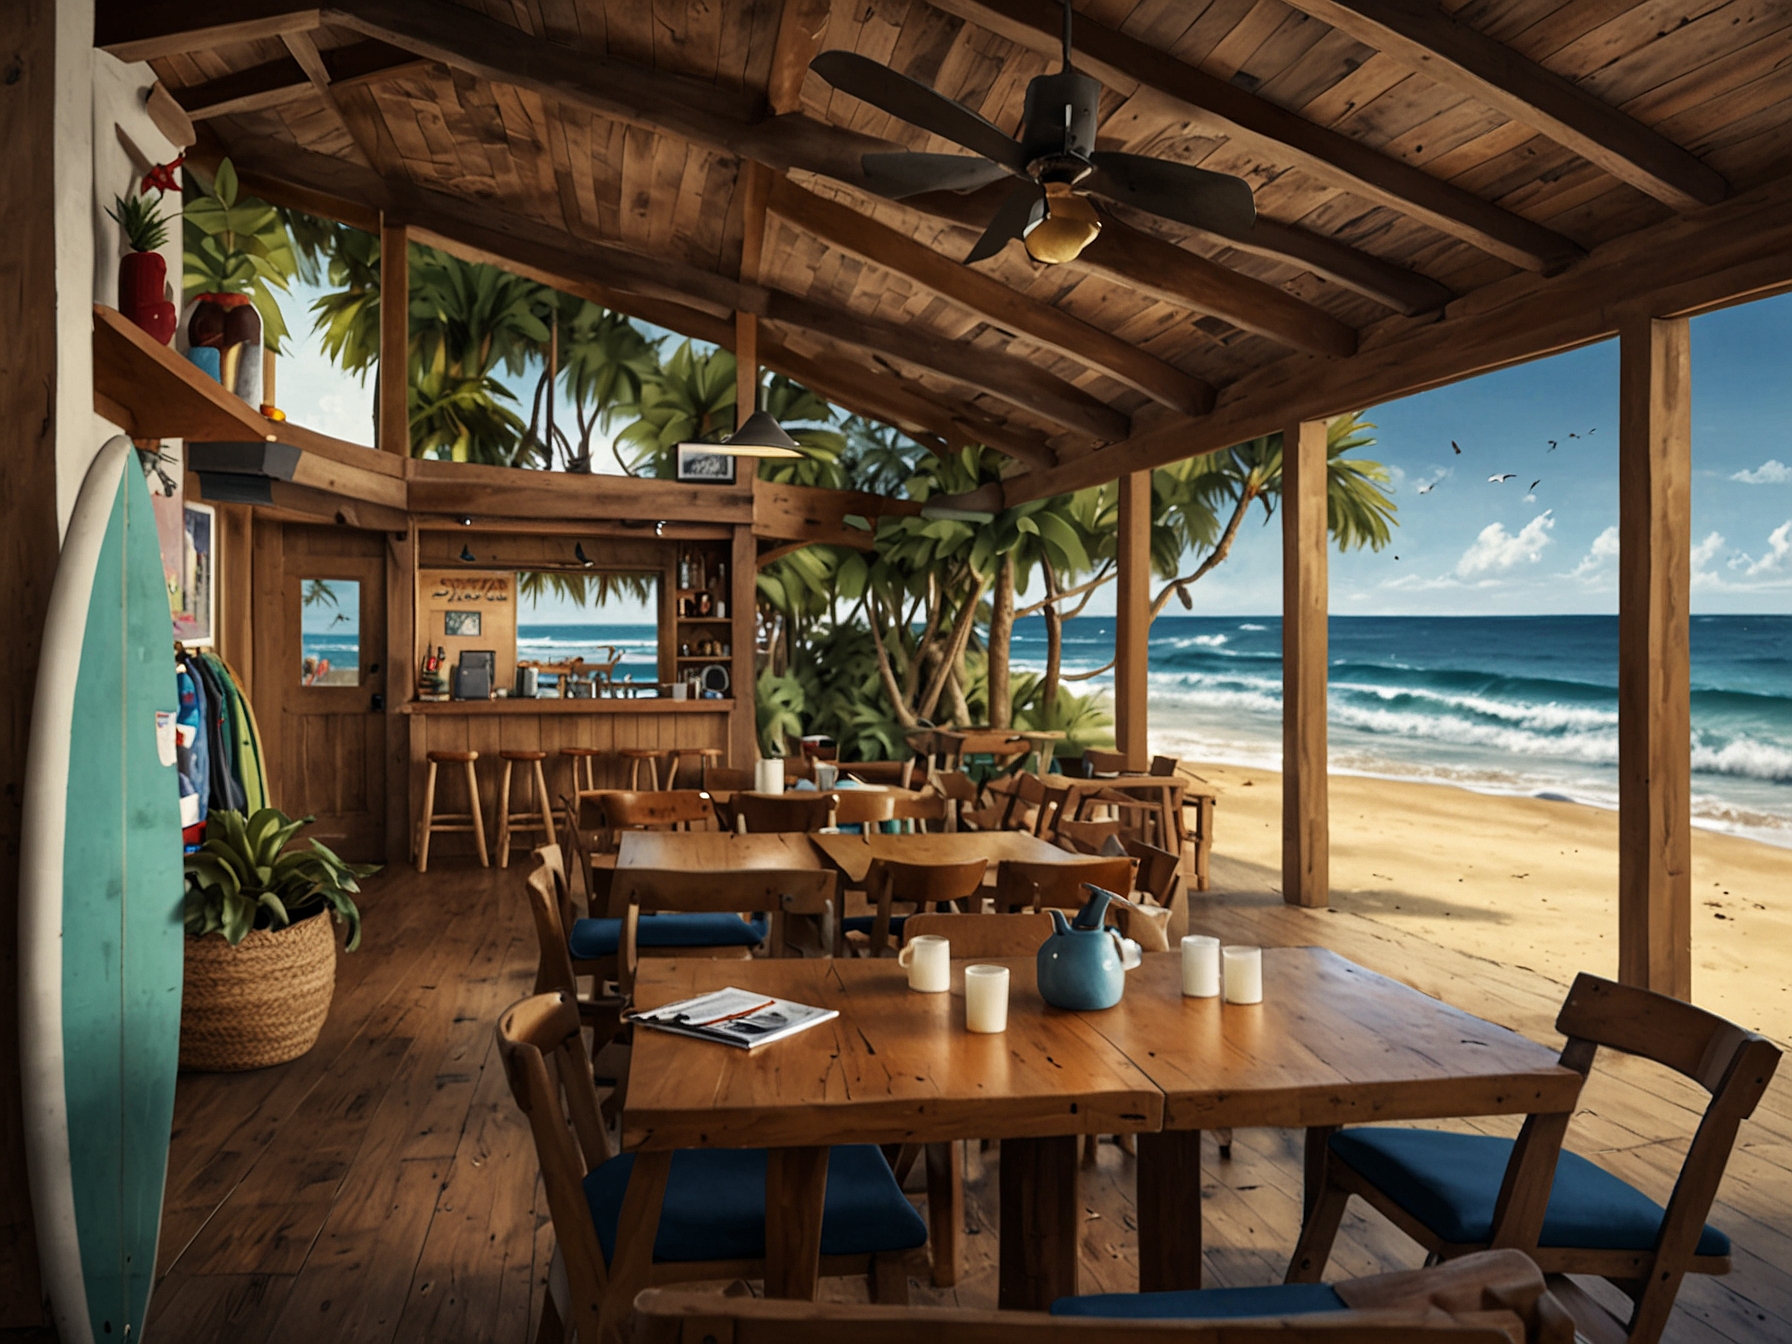 Illustration of Surf Lodge, highlighting its casual beachside vibe, surfboard rentals, and connection to local surfing spots, catering to adventure travelers and surf enthusiasts.